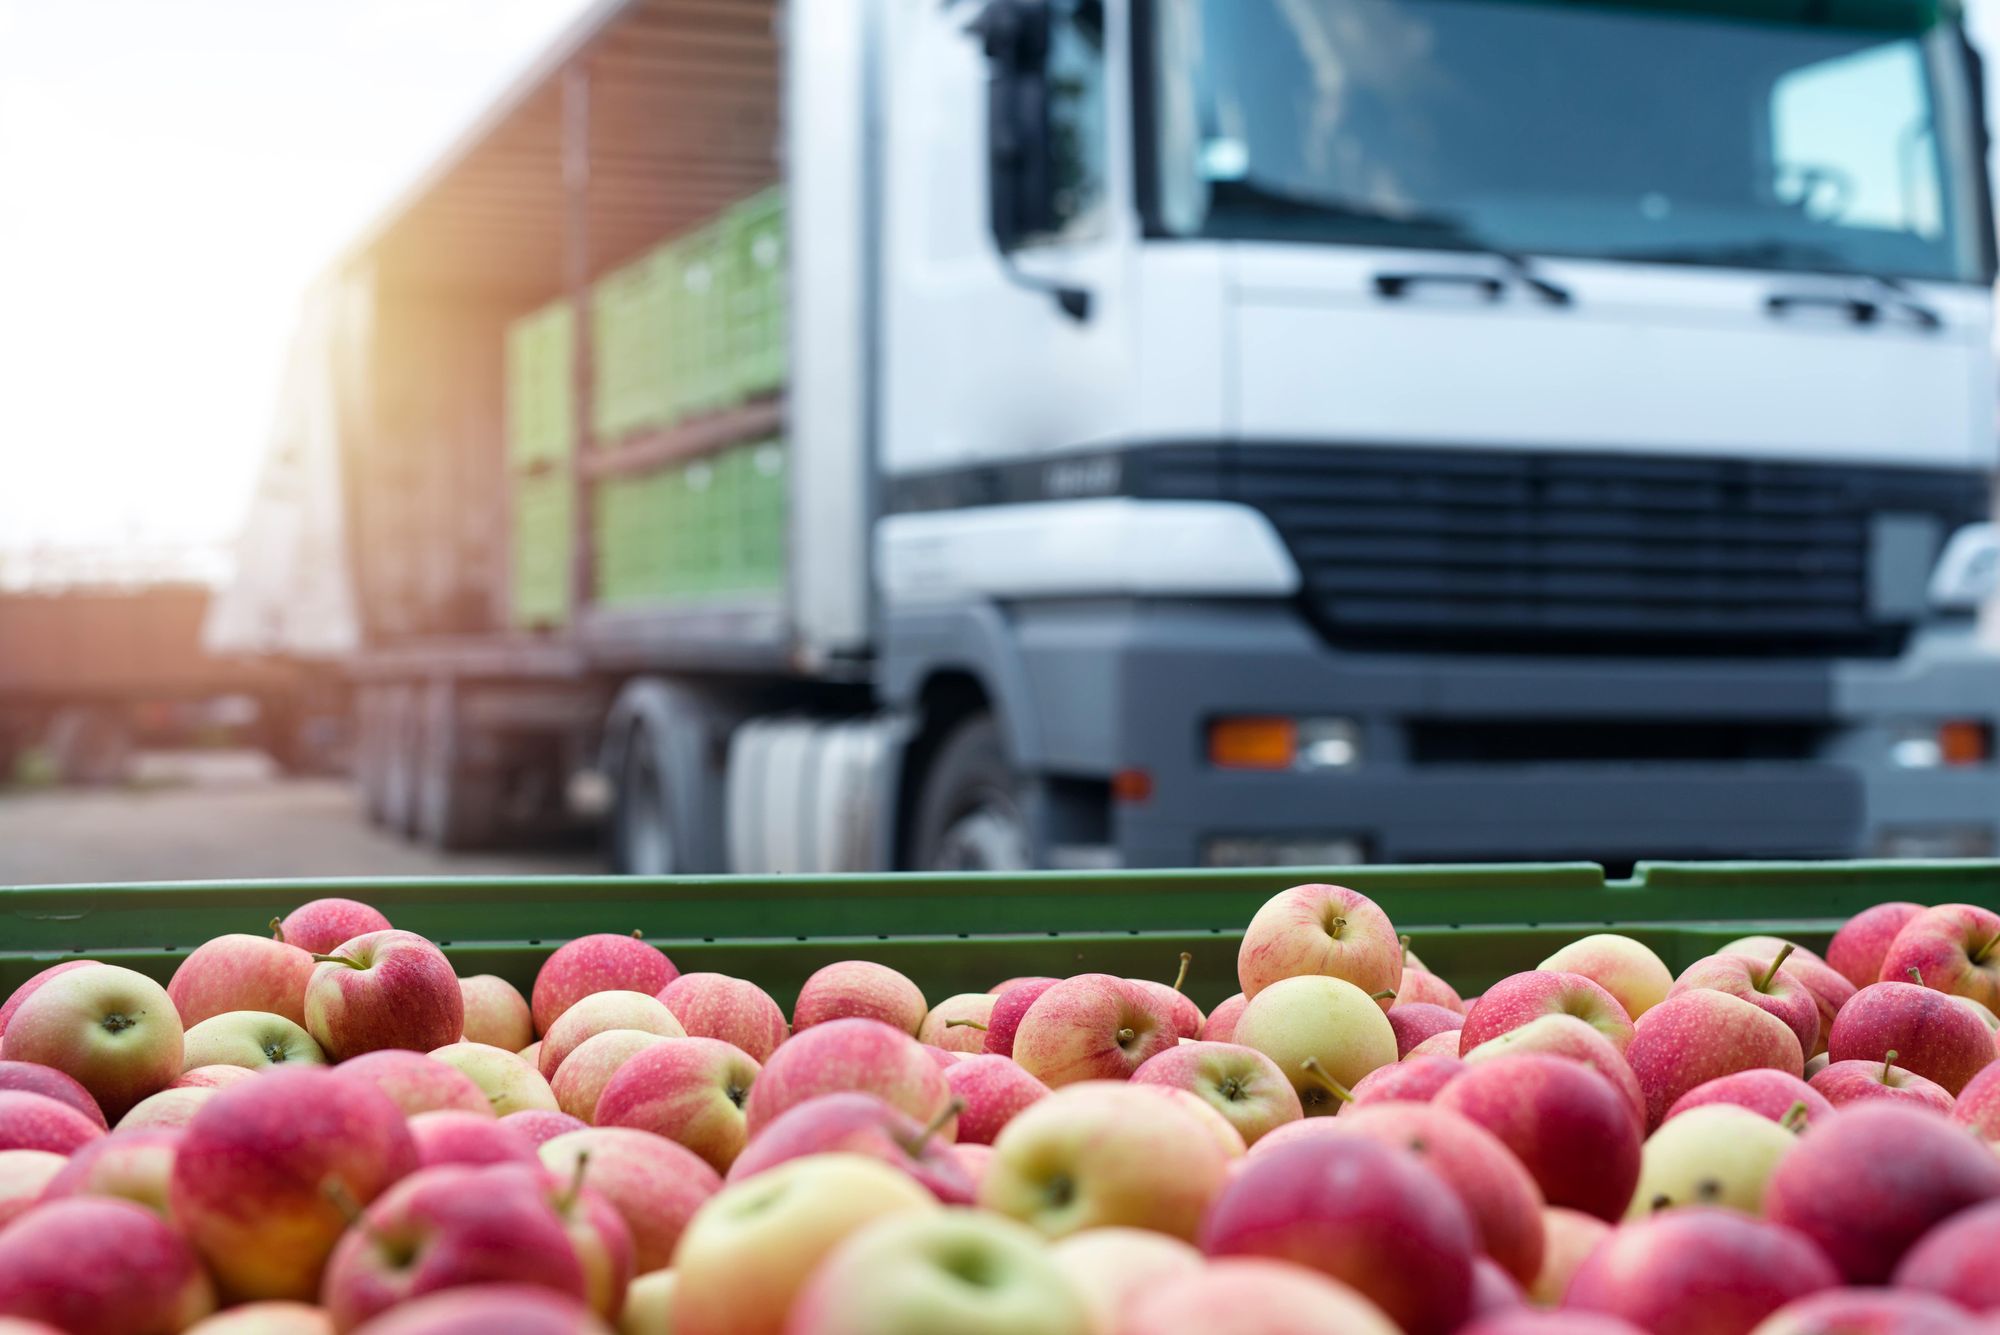 A truck in the background of a pallet of apples